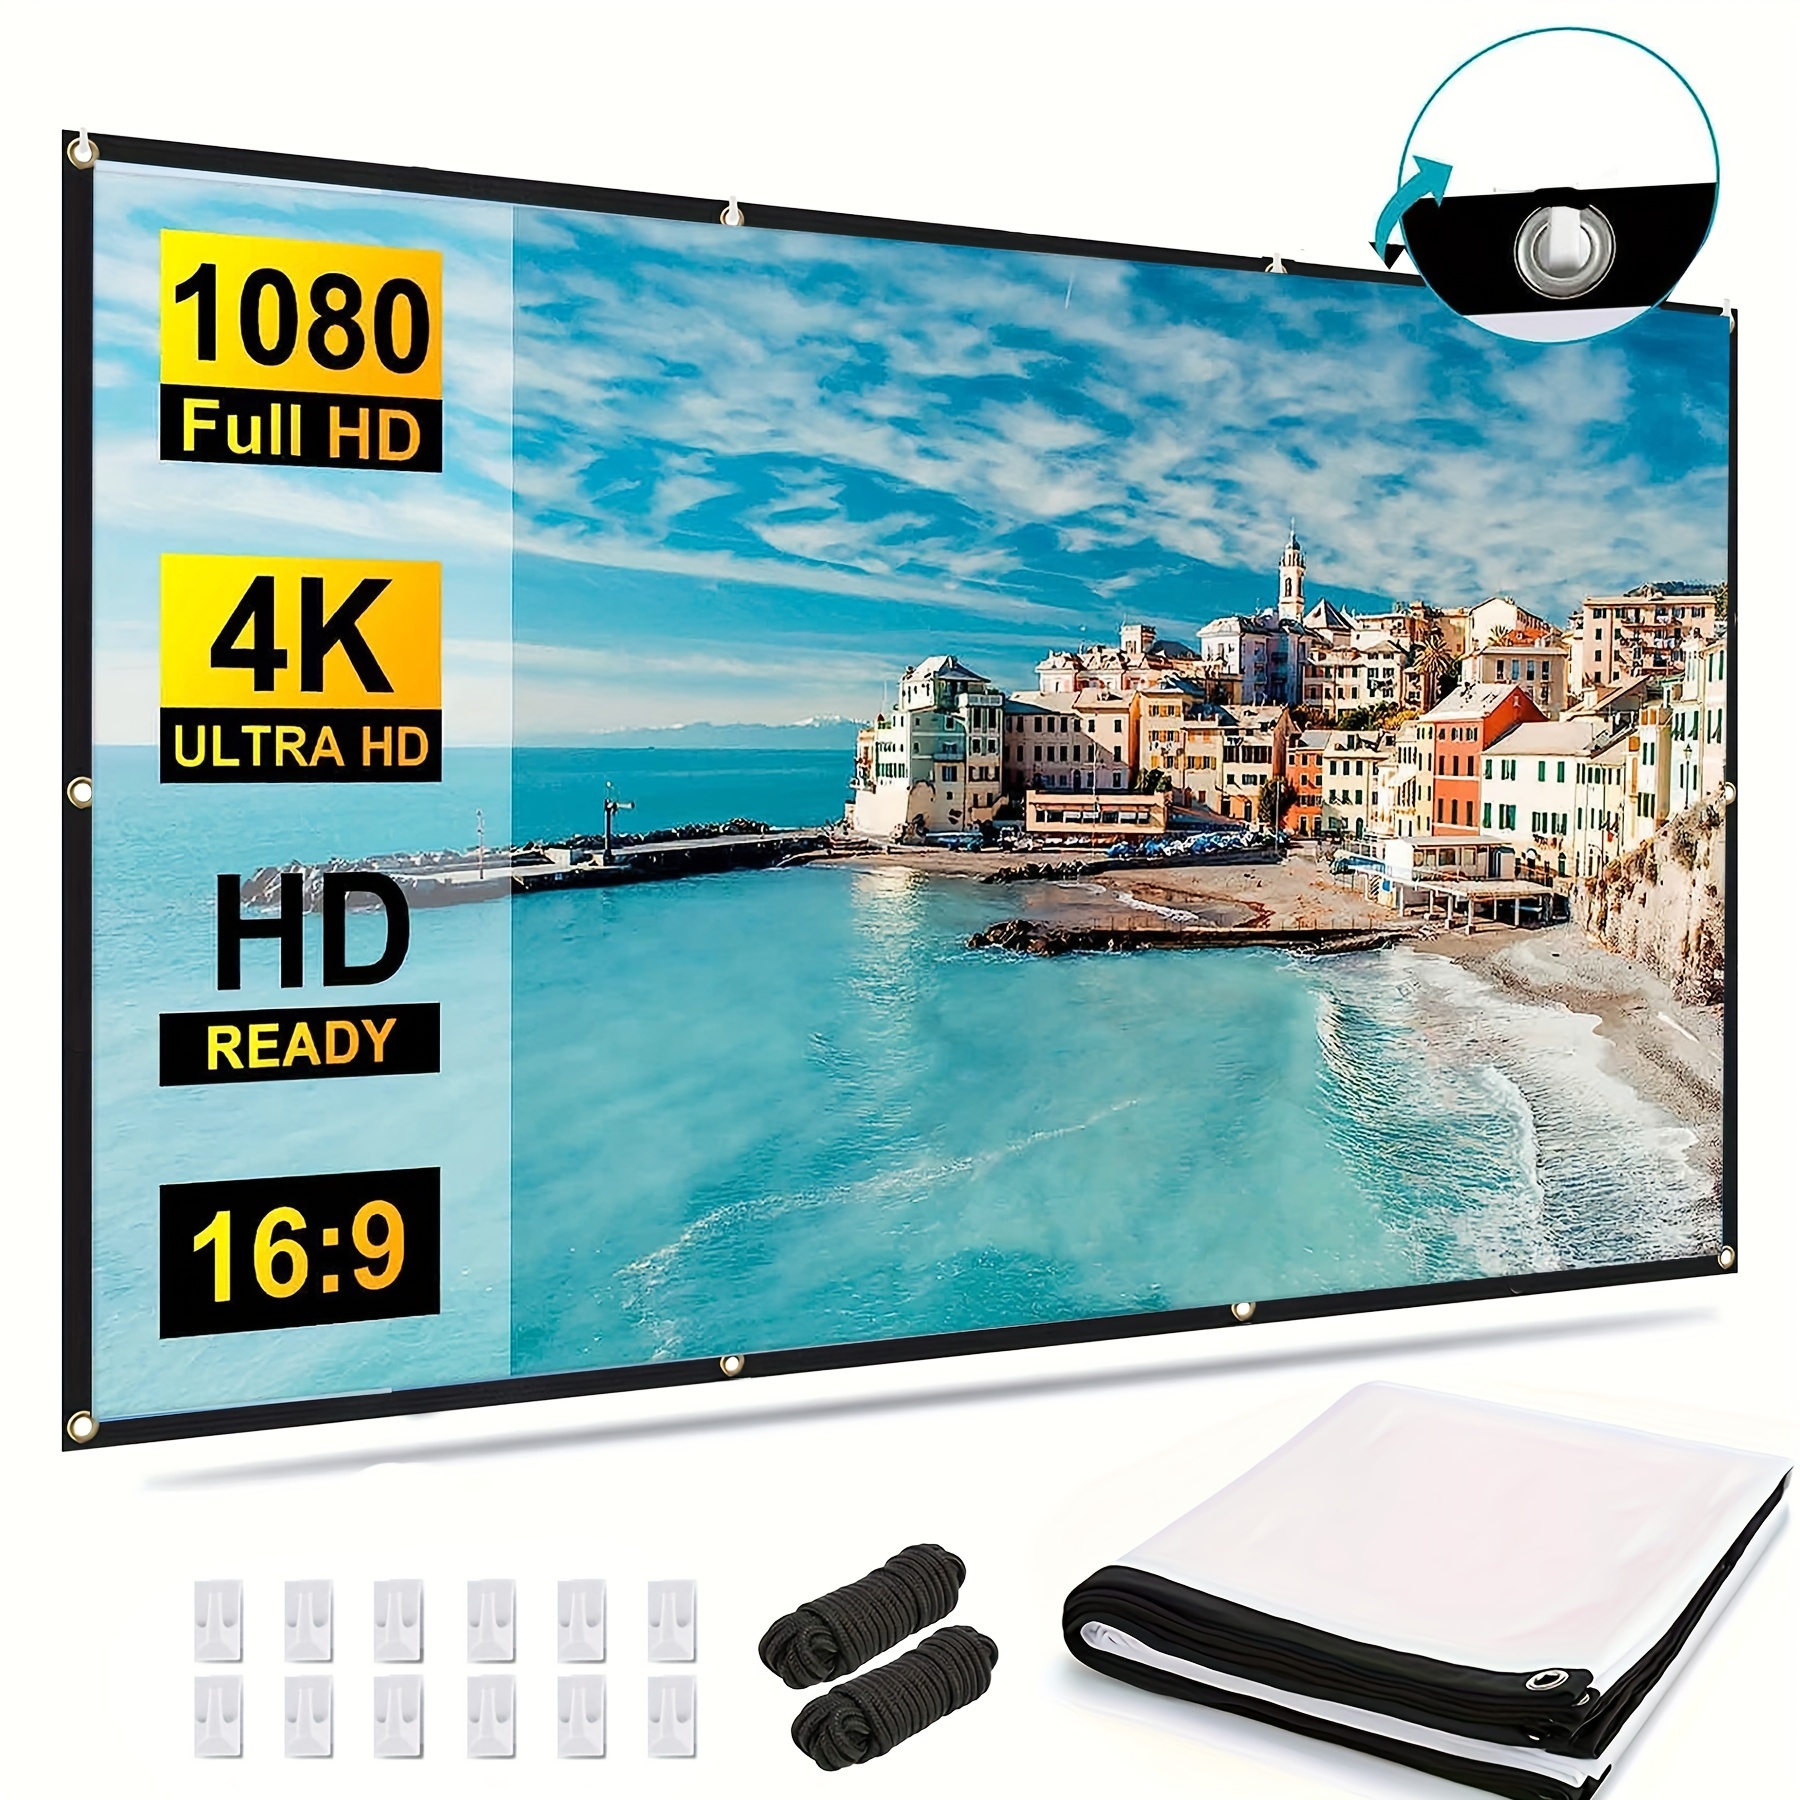 

Tuogtci 100 Inch Folding Portable Projection Screen 4k Hd 16:9 Polyester Anti-wrinkle For Dual Side Projection, Home Theater, Outdoor, Office, And Classroom Use - Uncharged Projector Accessory